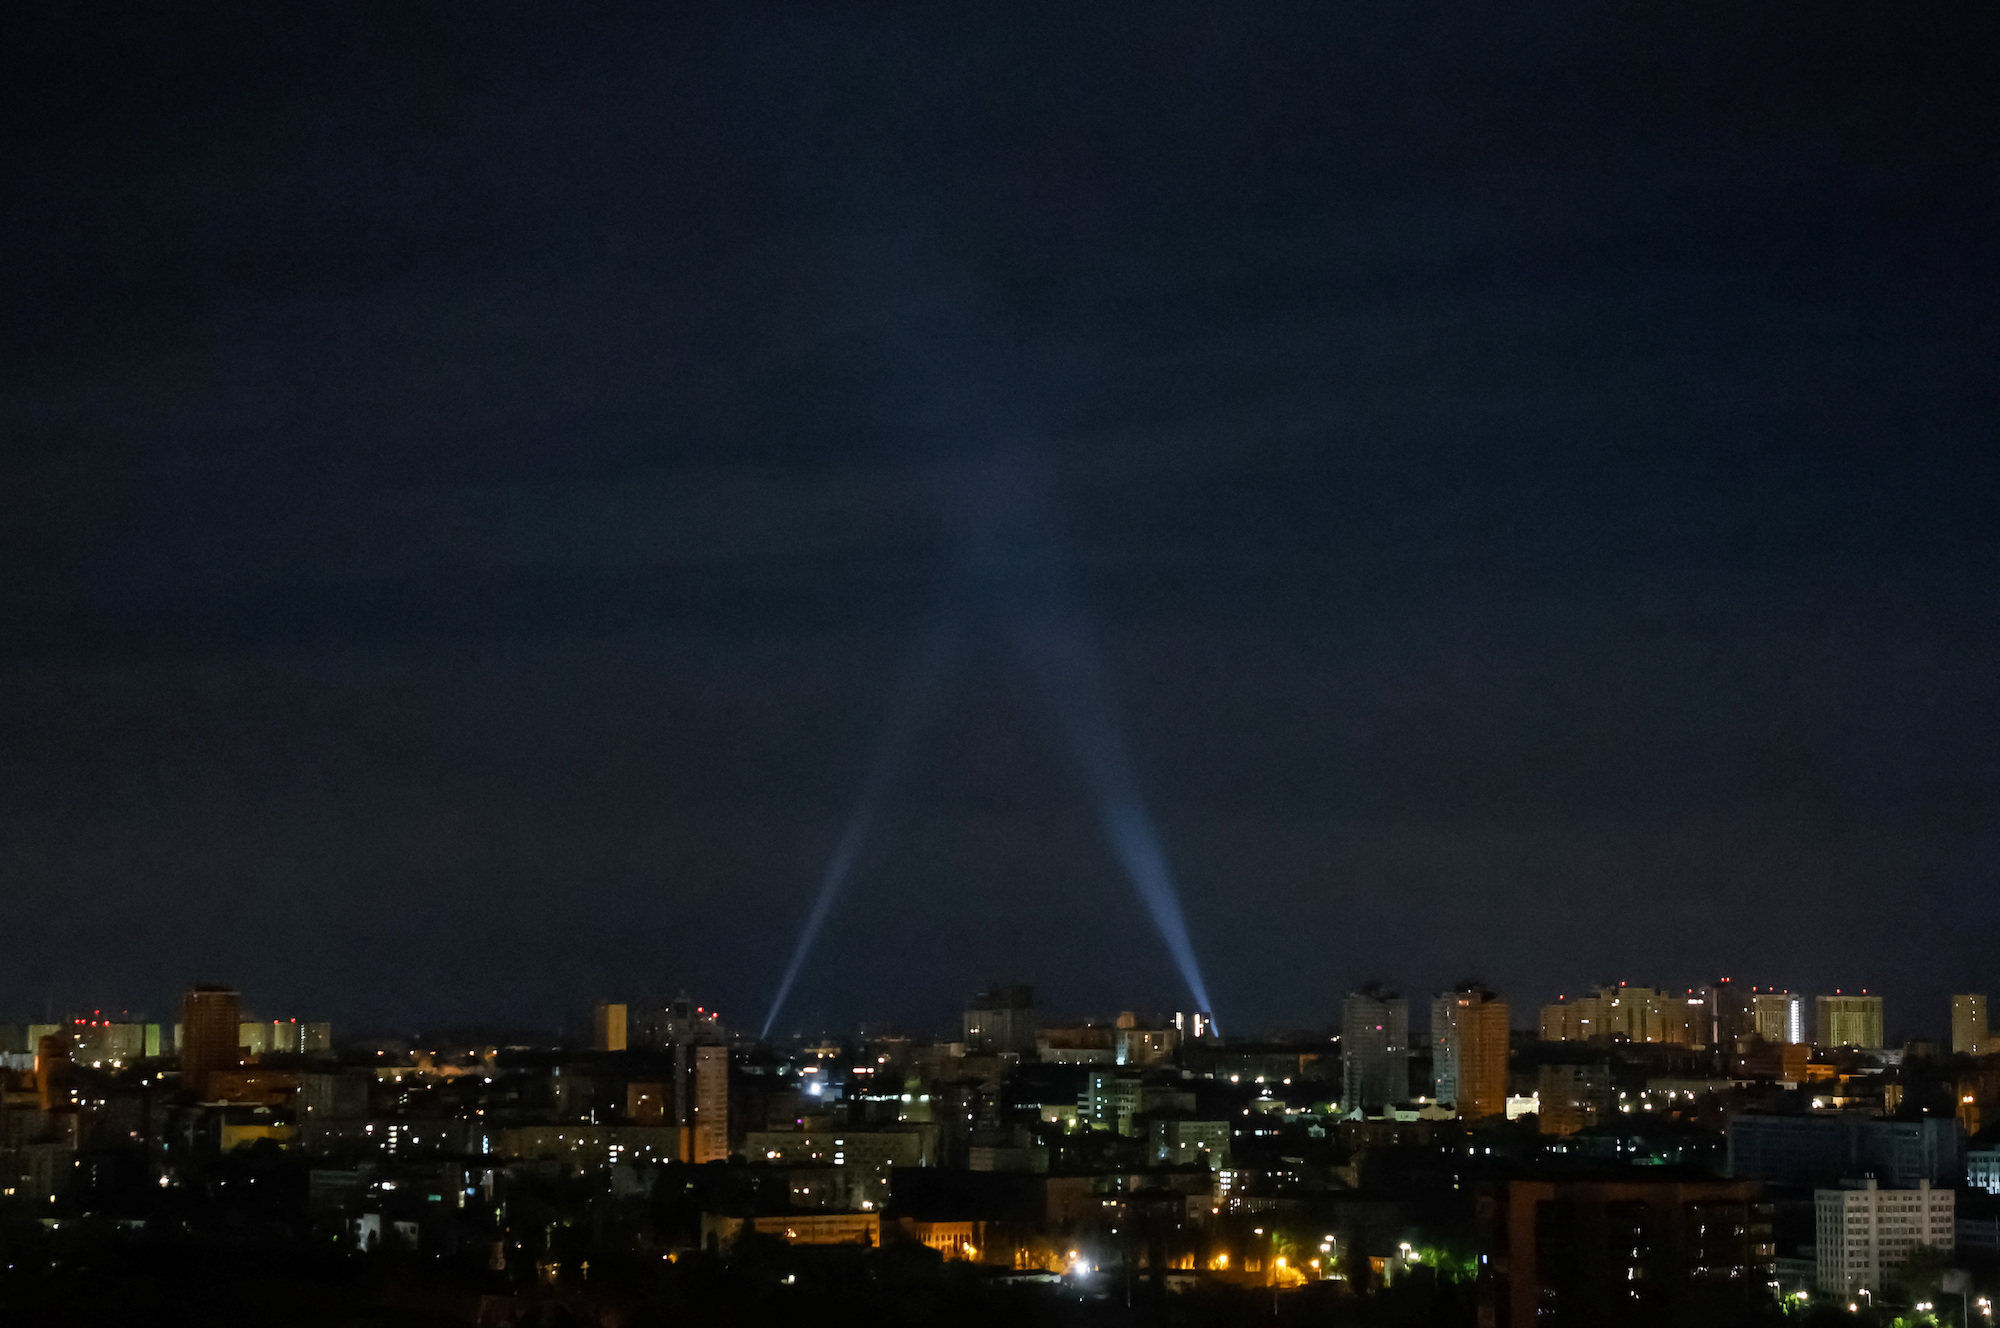 Ukrainian servicemen use spotlights as they search for drones in the sky over the city during a Russian drone strike in Kyiv on Thursday.